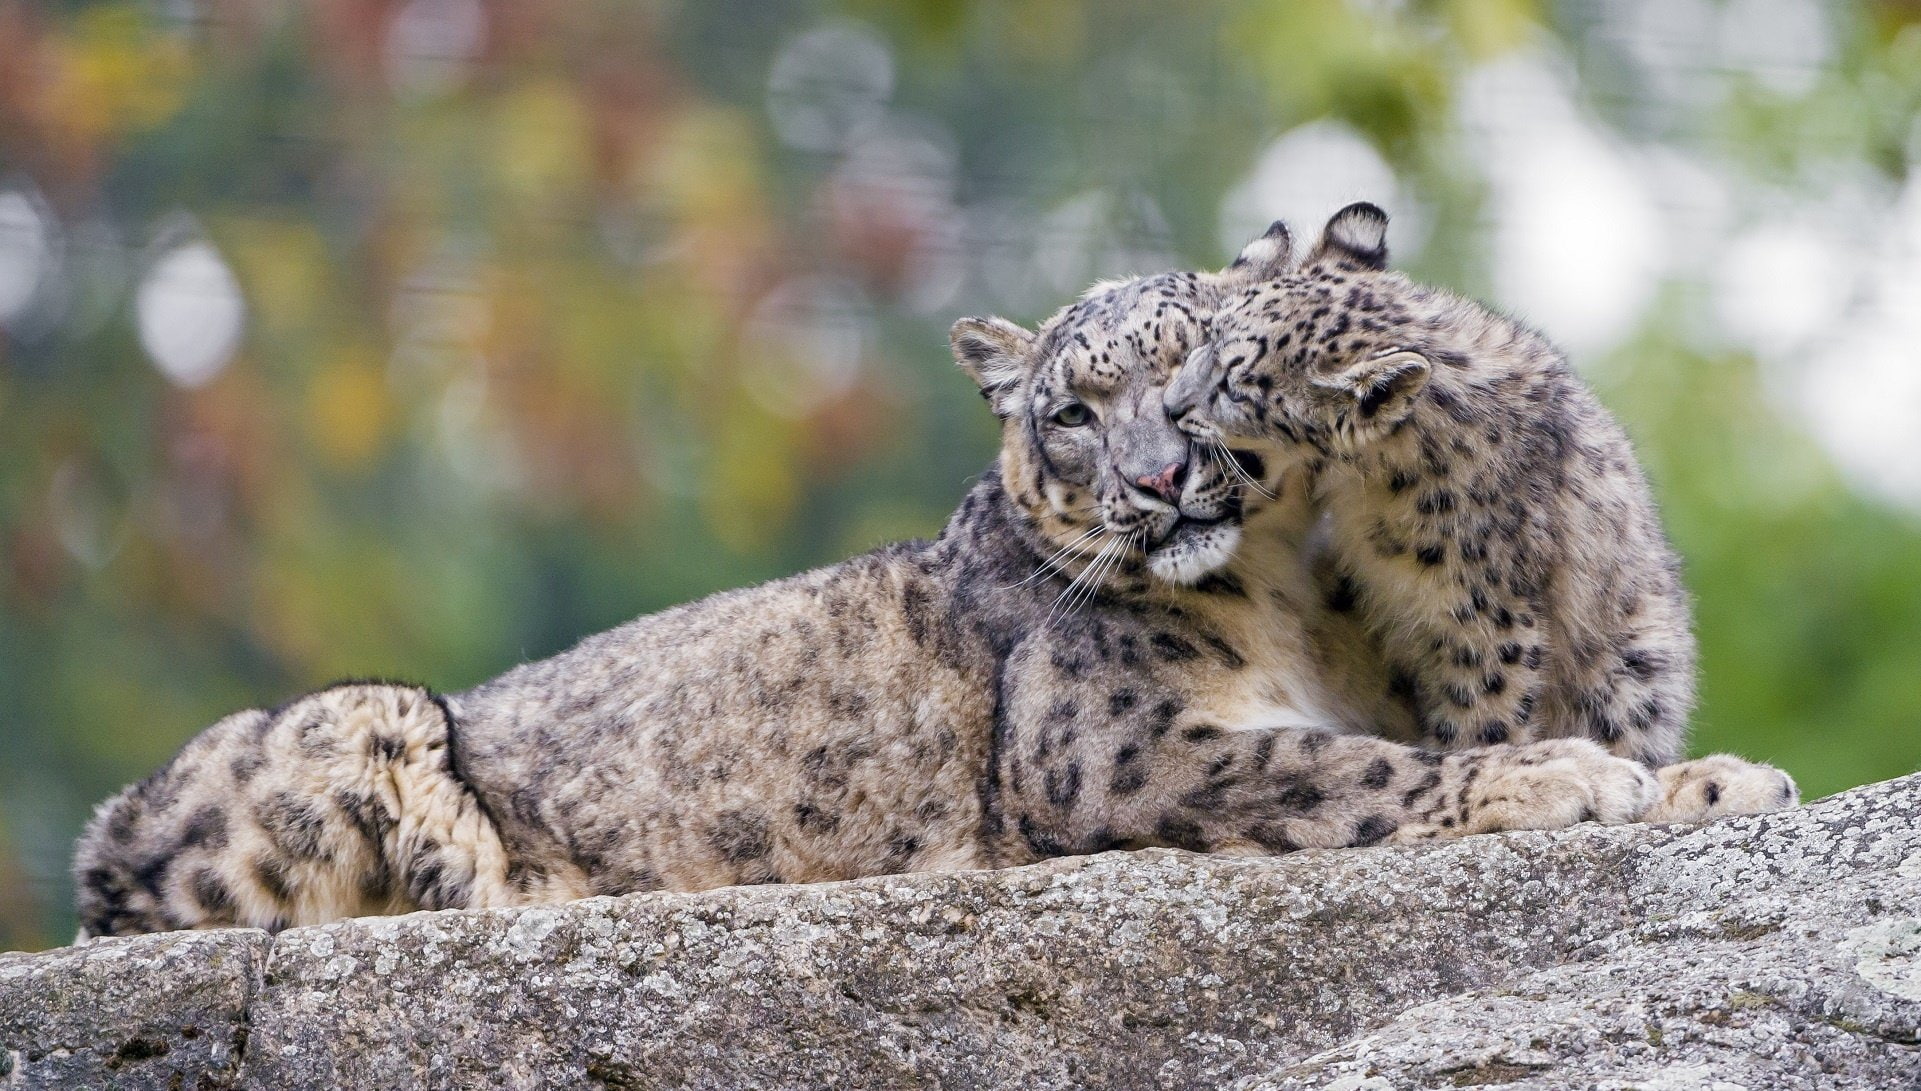 Caring, cat, couple, Cub, family, game, Kindness, leopard, Mother